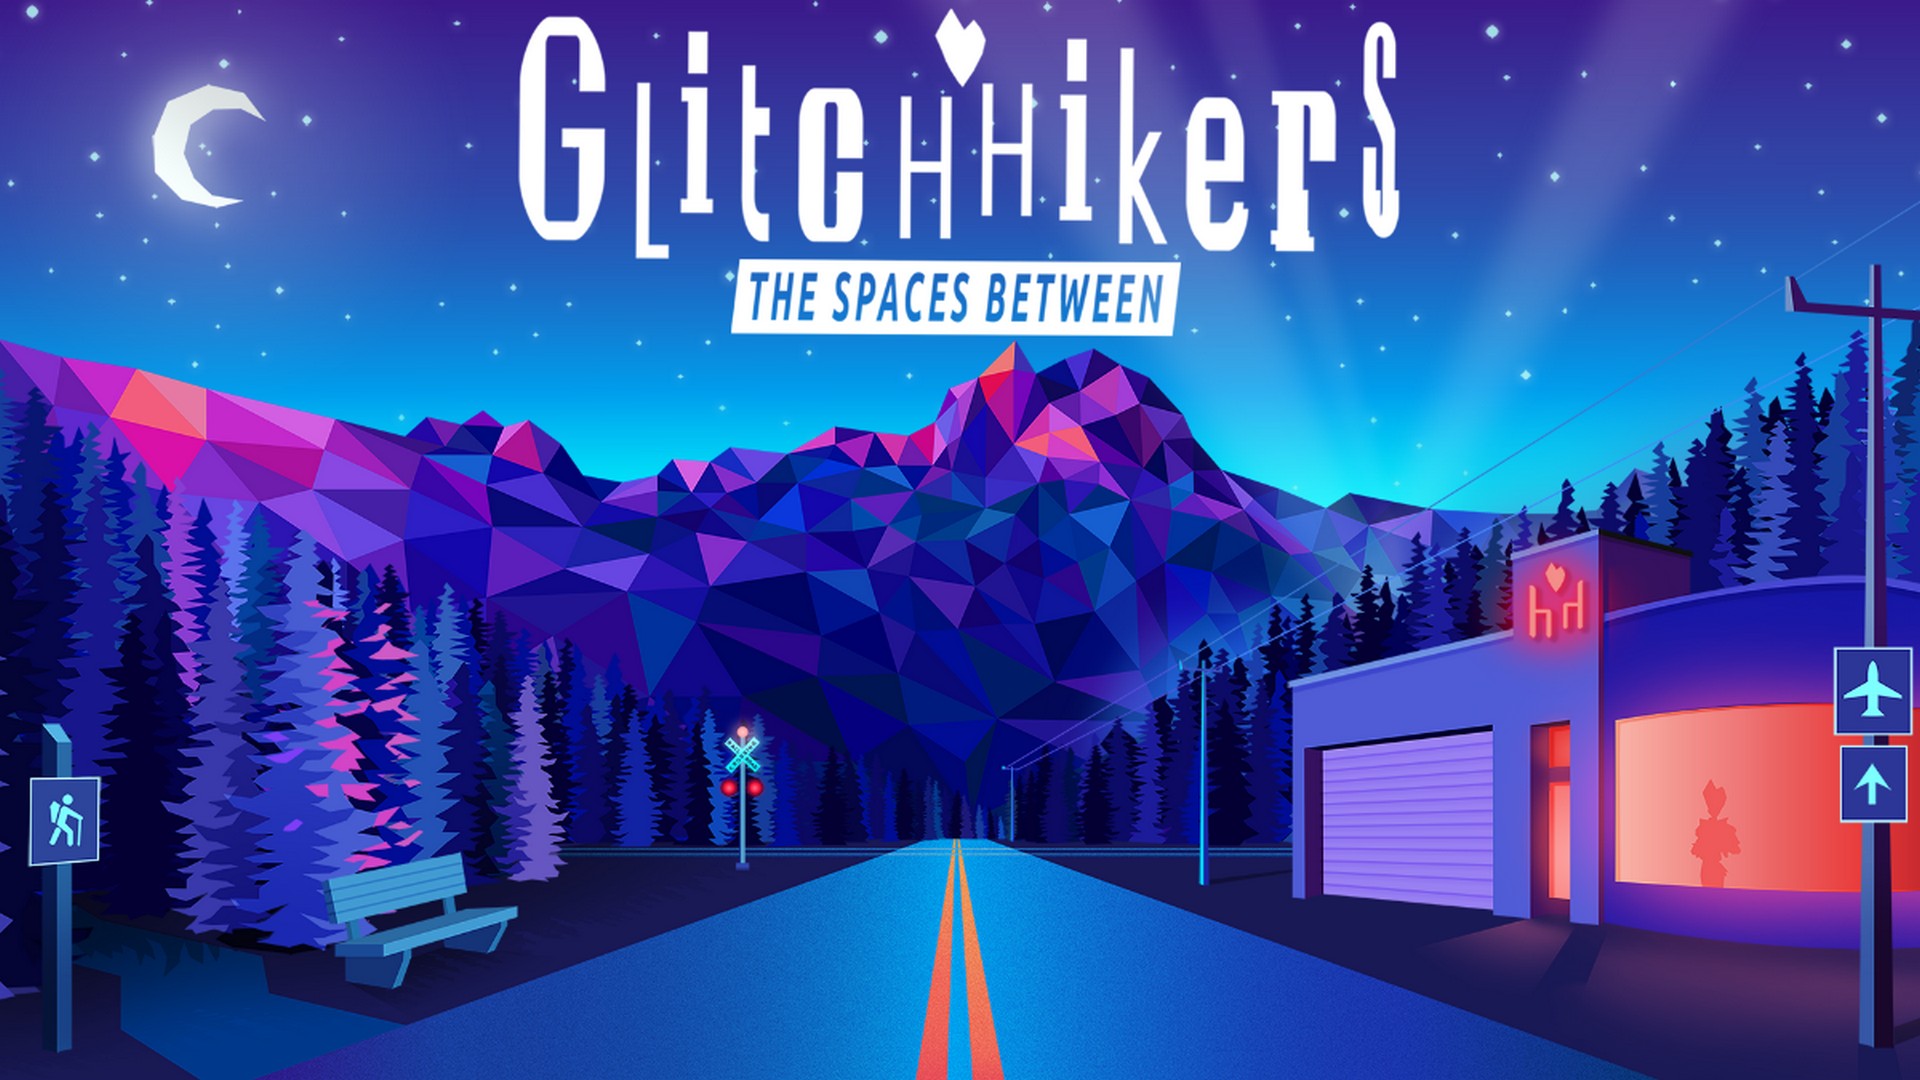 Glitchhikers: The Spaces Between Launches Today